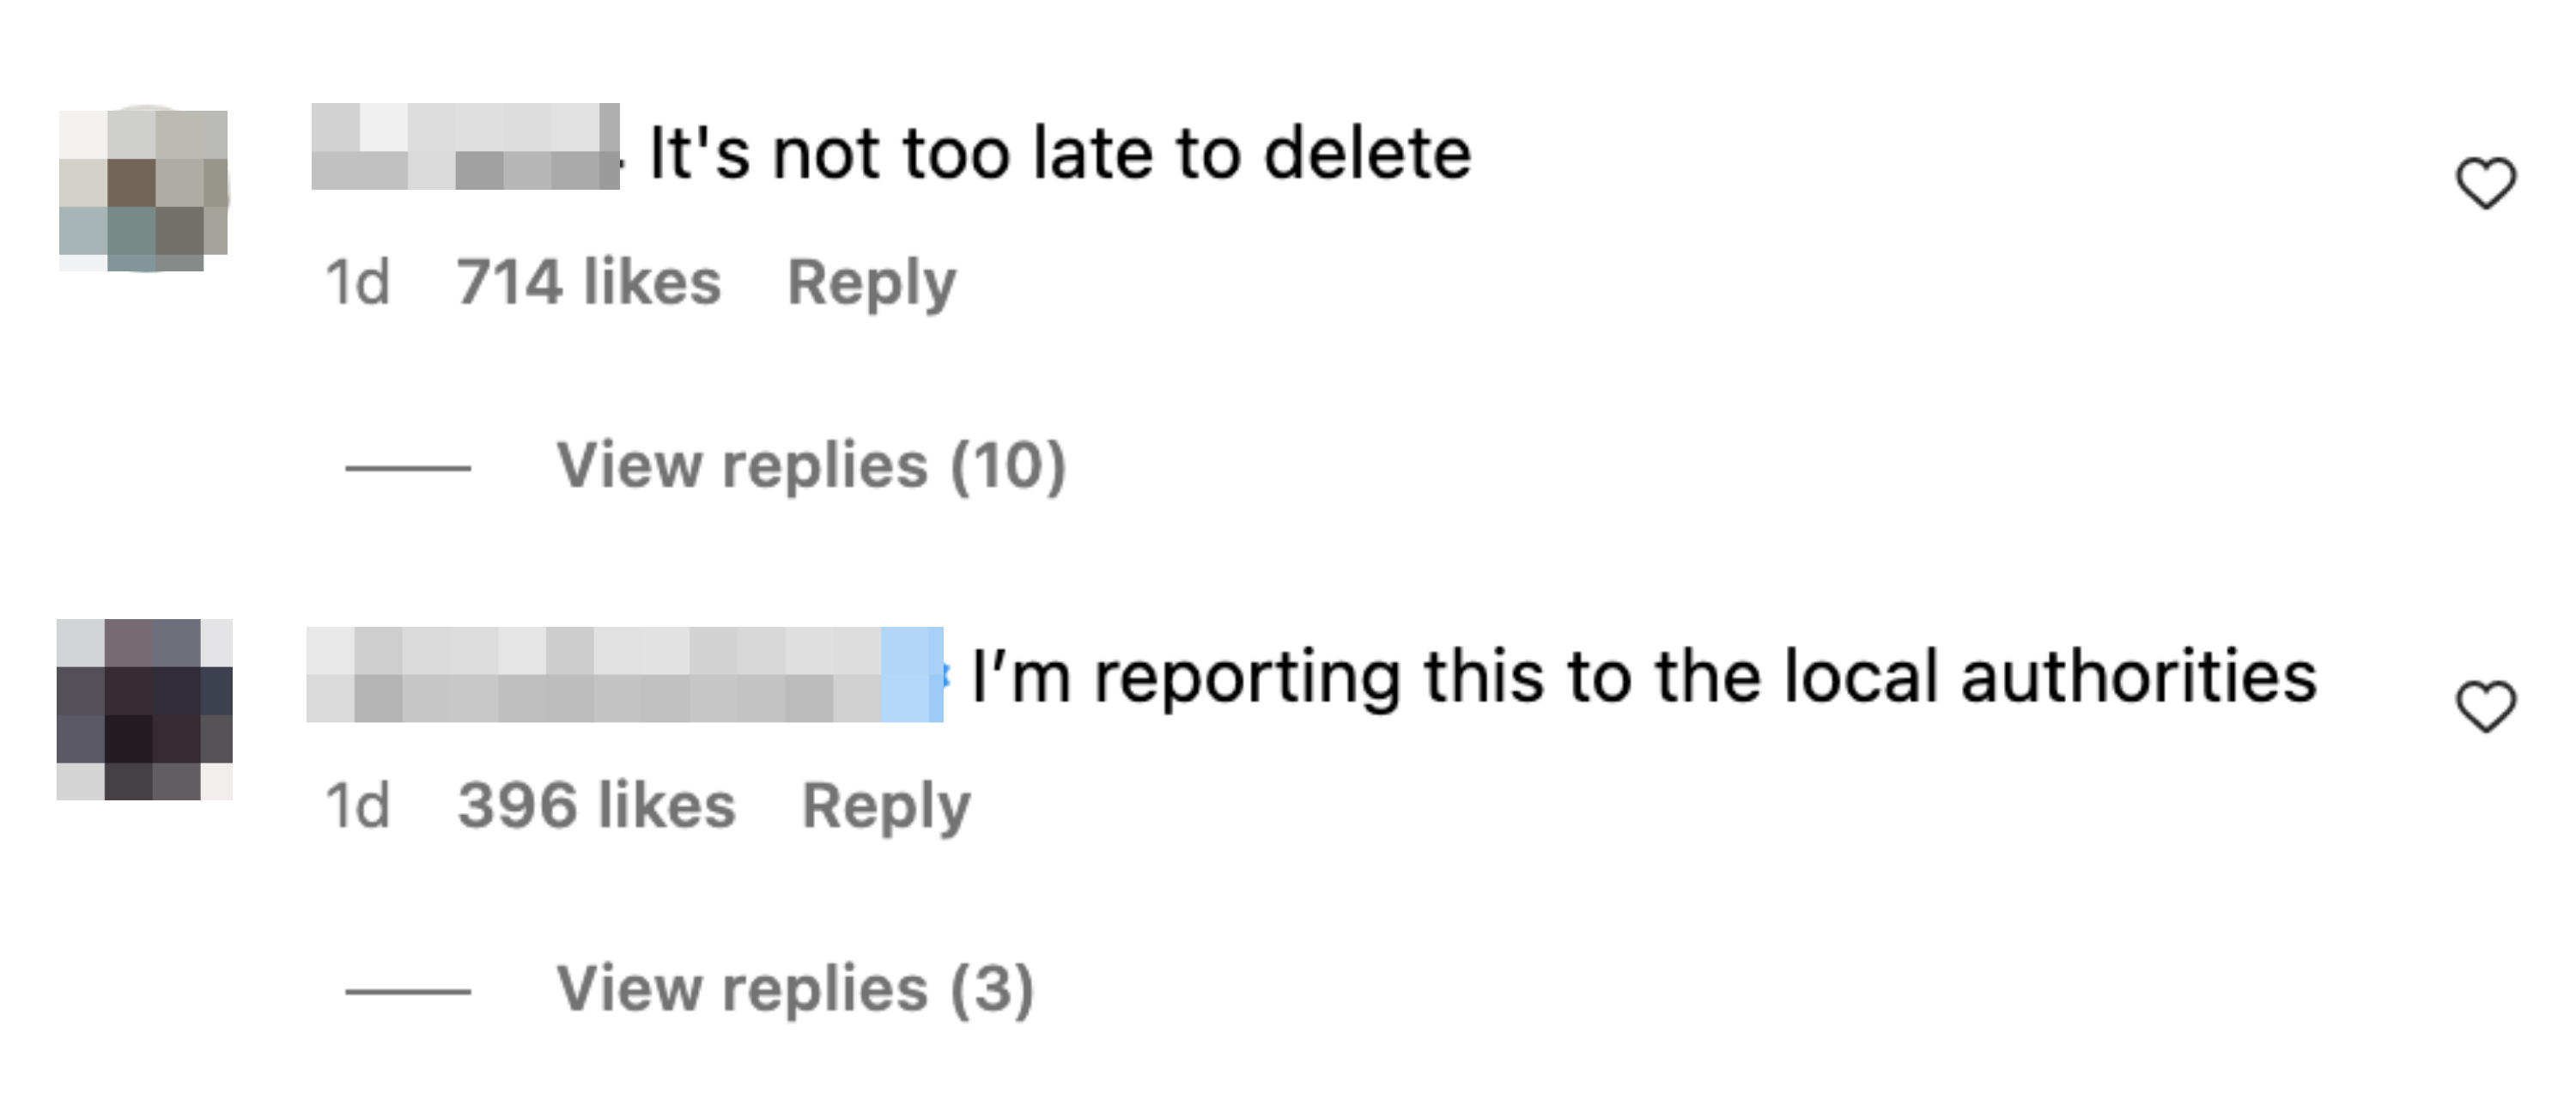 &quot;It&#x27;s not too late to delete&quot;